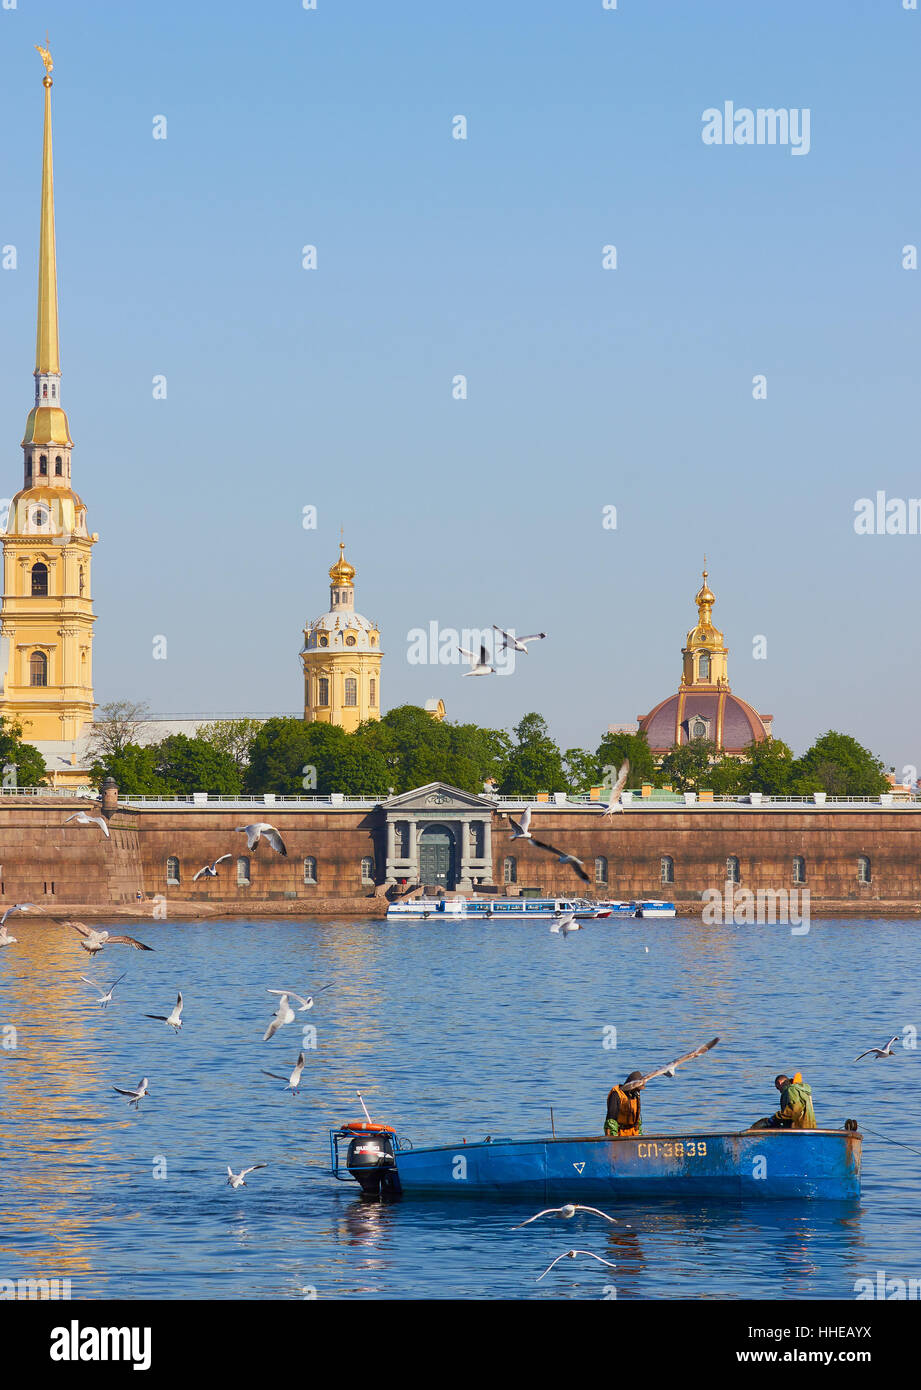 Birds flying around a fishing boat on the river Neva with Peter and Paul Fortress in the background St Petersburg Russia Stock Photo